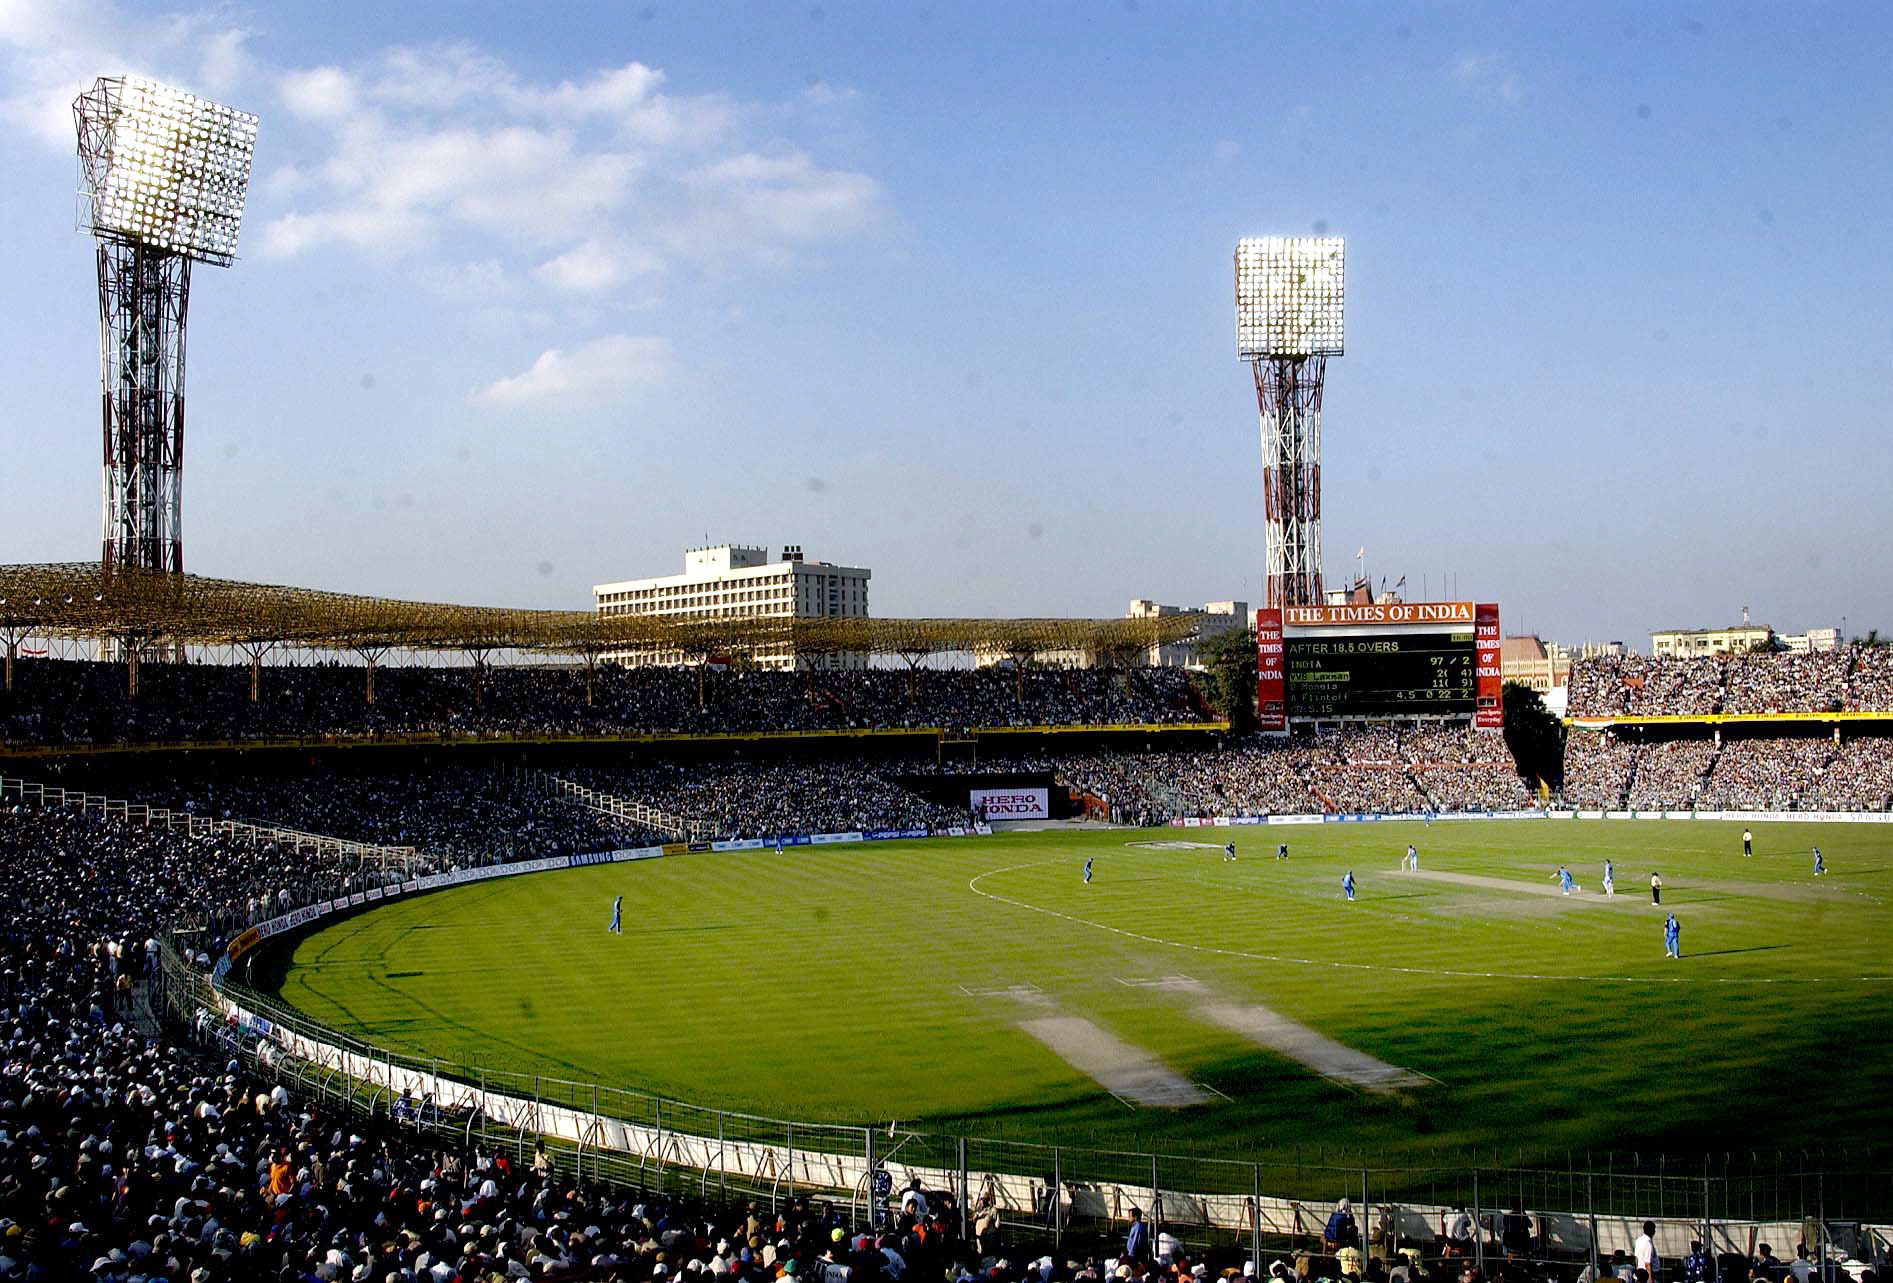 India's Parsee community led the development of Indian cricket, says historian Mihir Bose